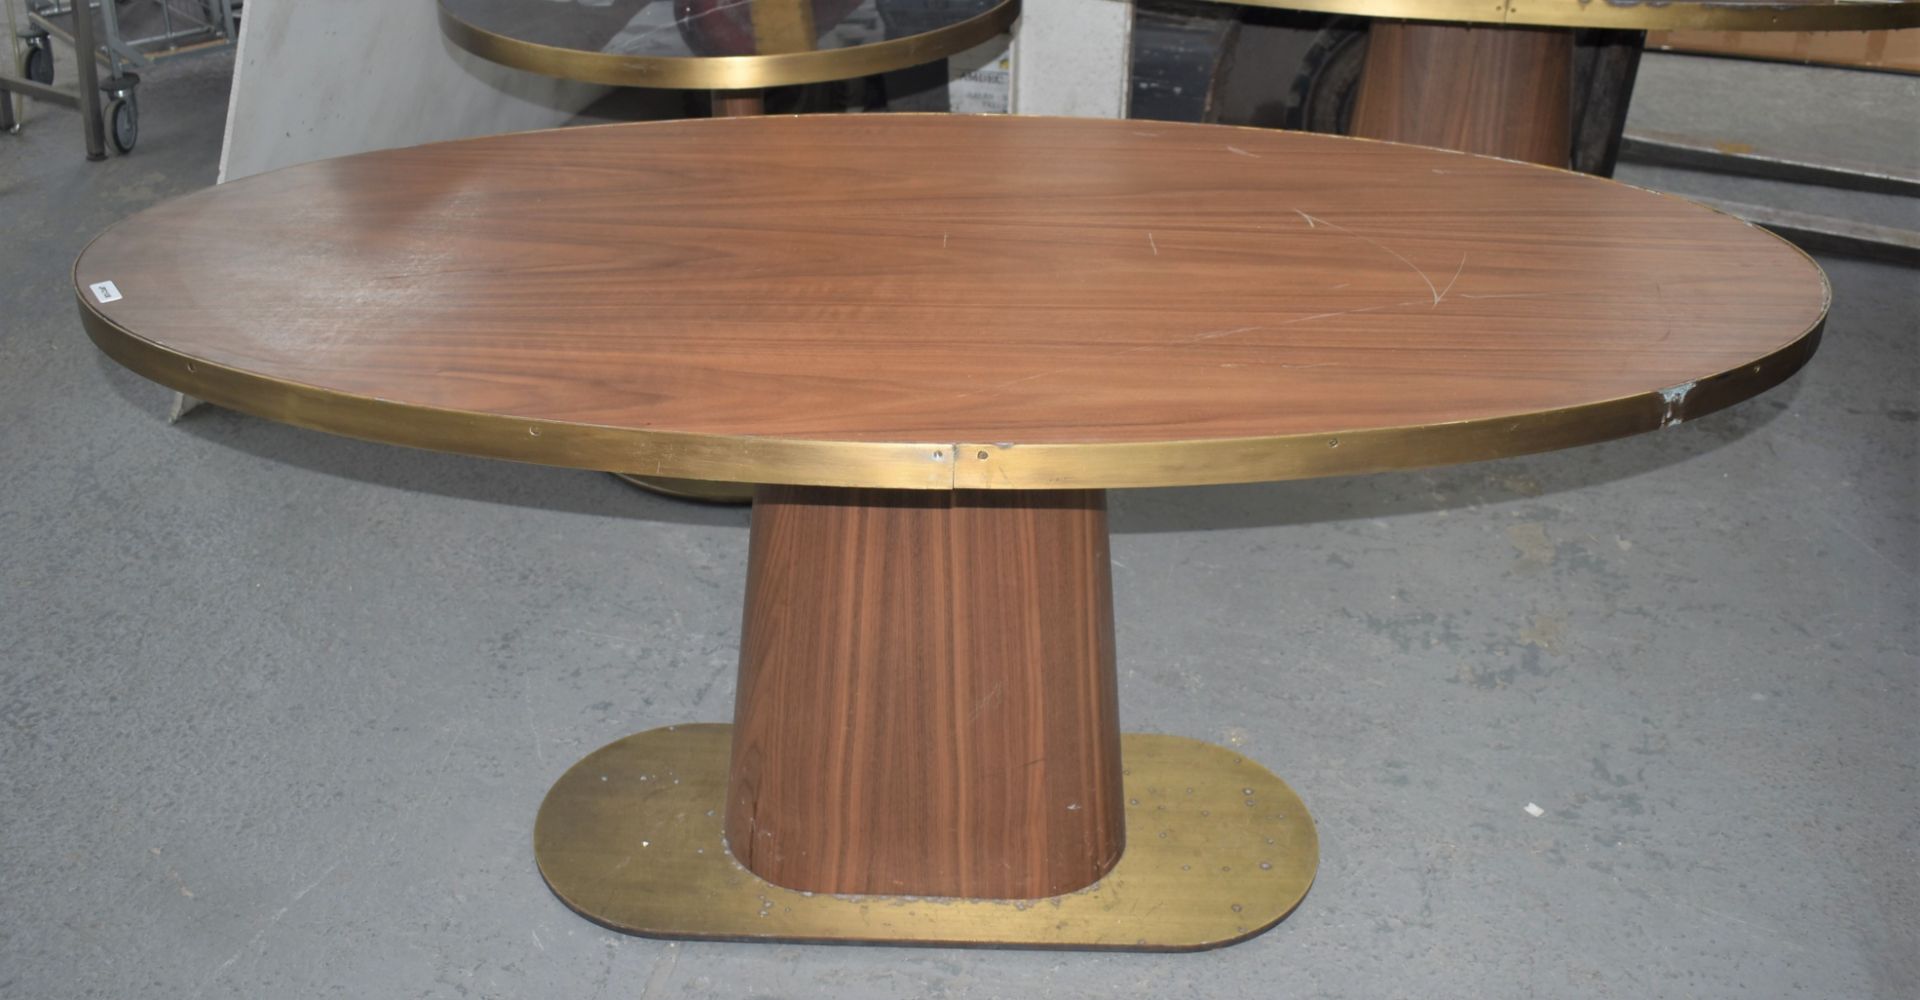 1 x Oval Banqueting Dining Table By AKP Design Athens - Walnut Top With Antique Brass Edging - Image 3 of 7